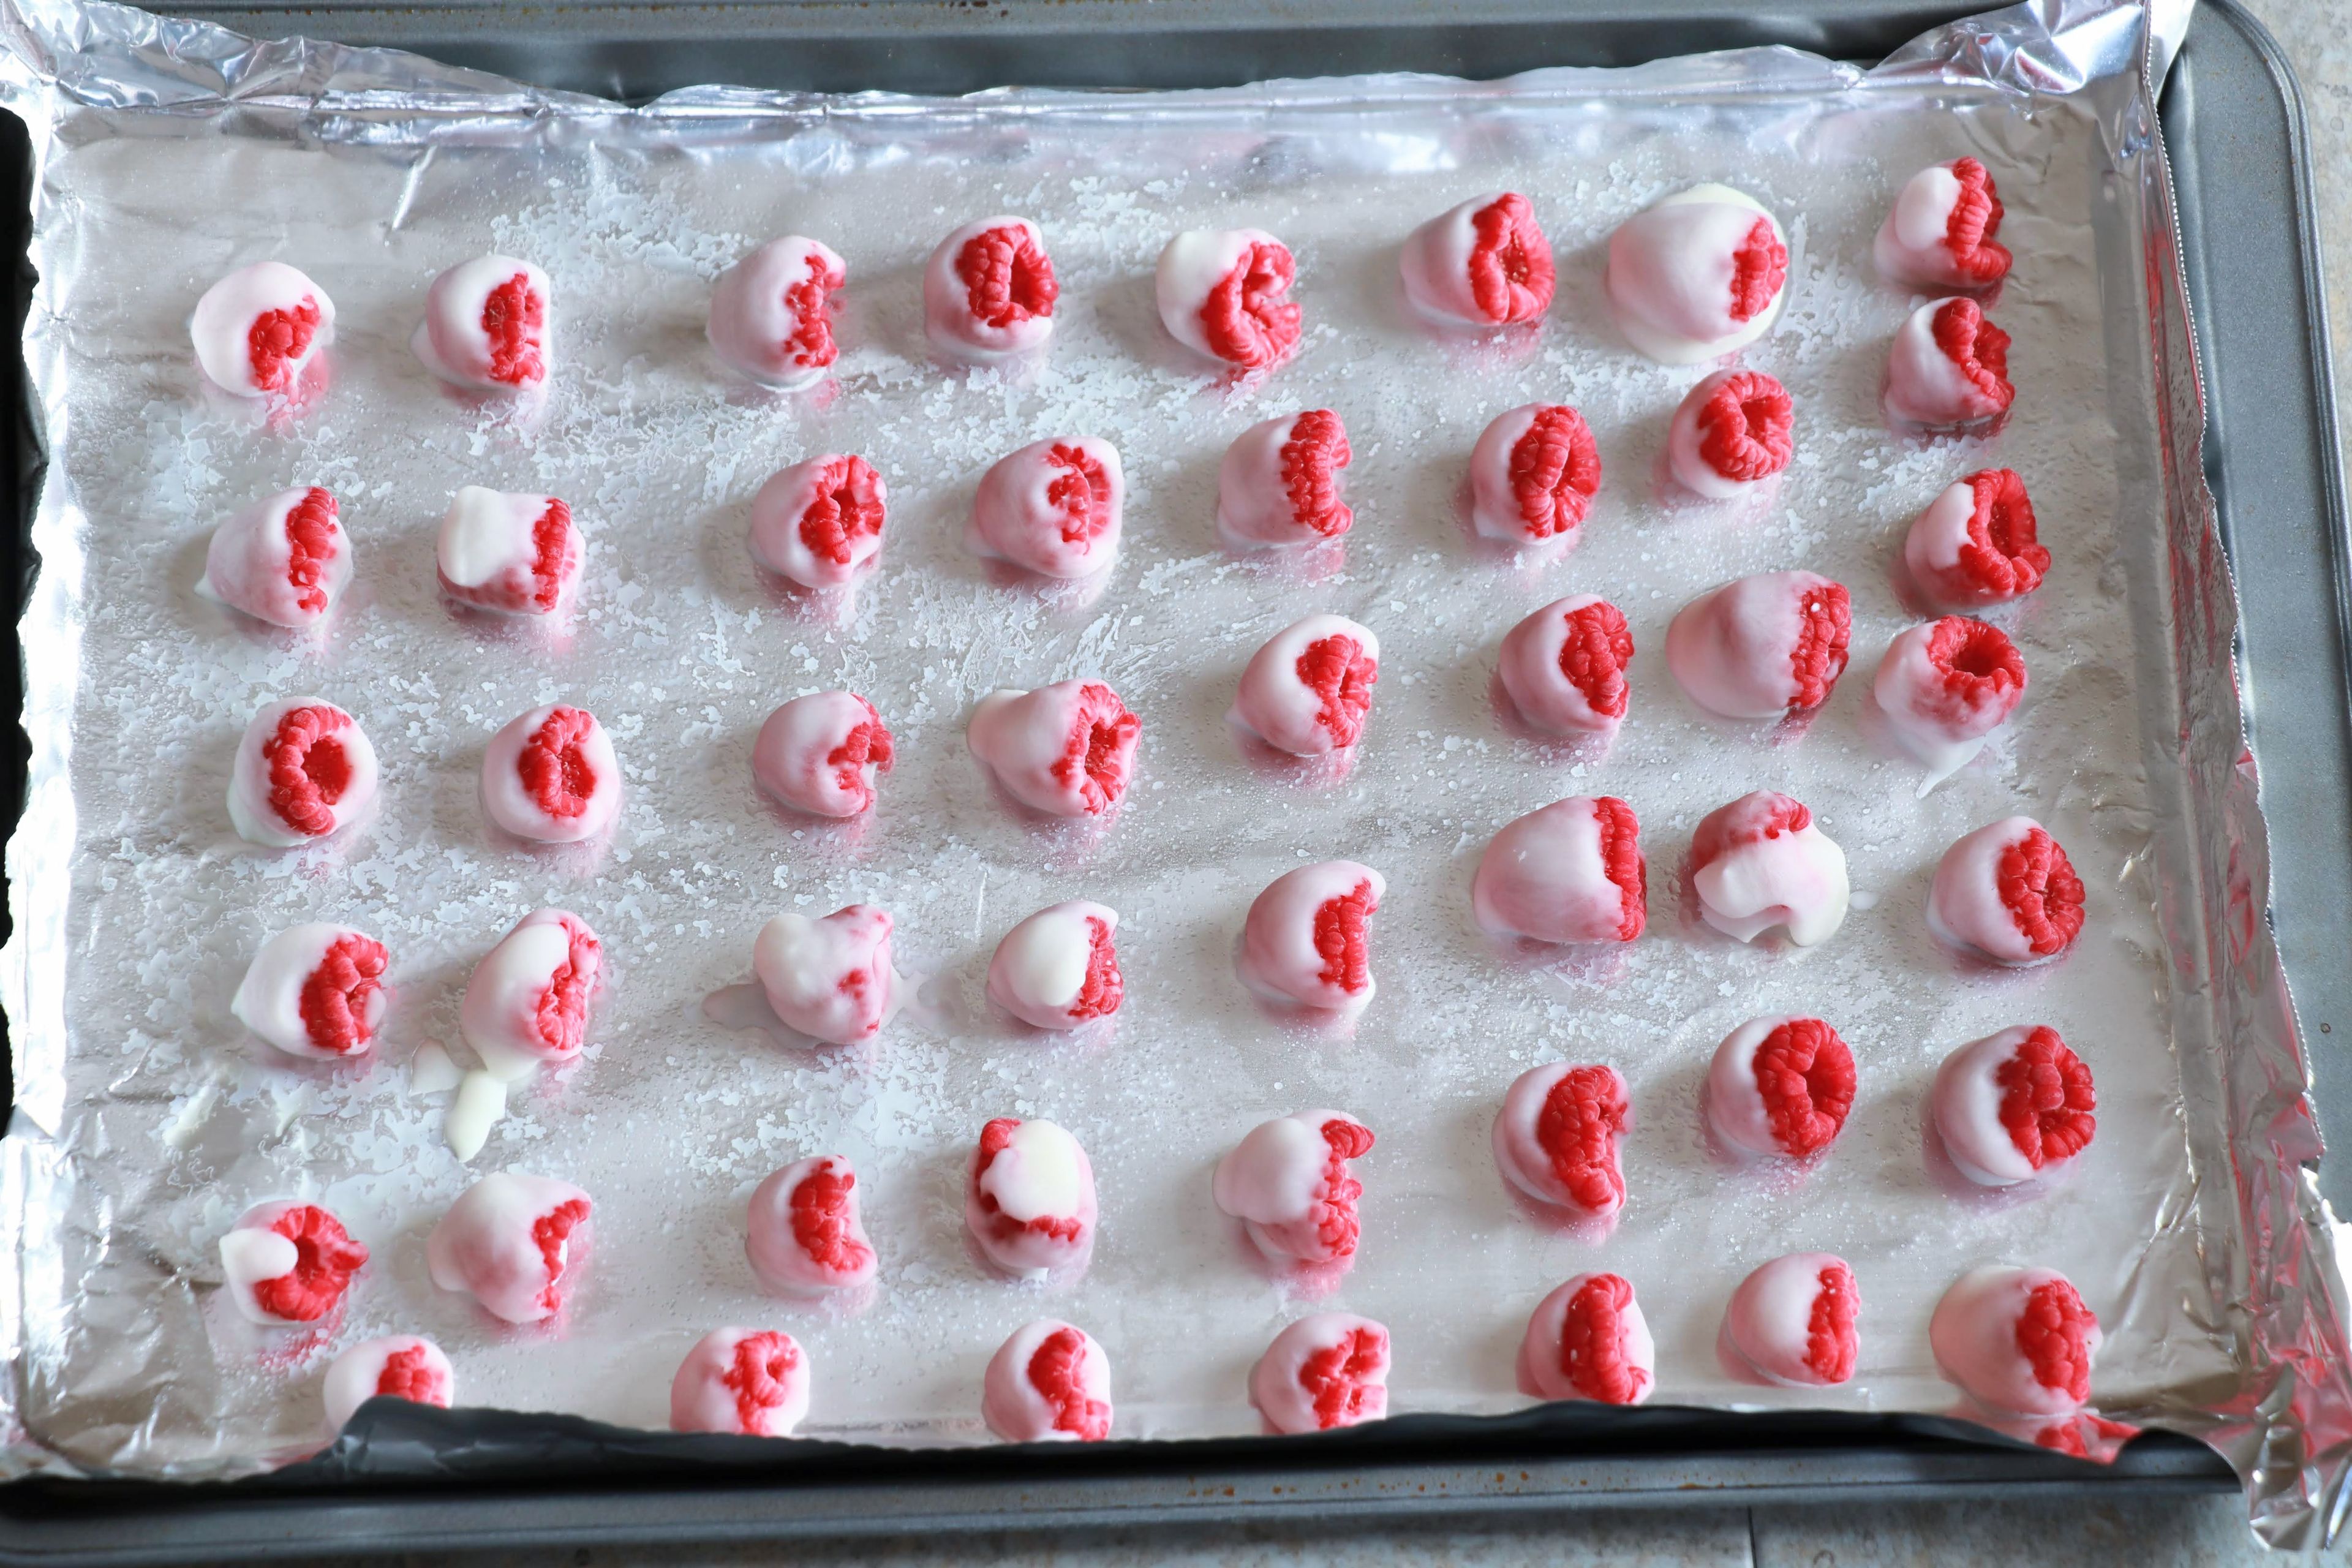 Using a toothpick or your hands, dip the raspberries into the yogurt and place onto a tray.